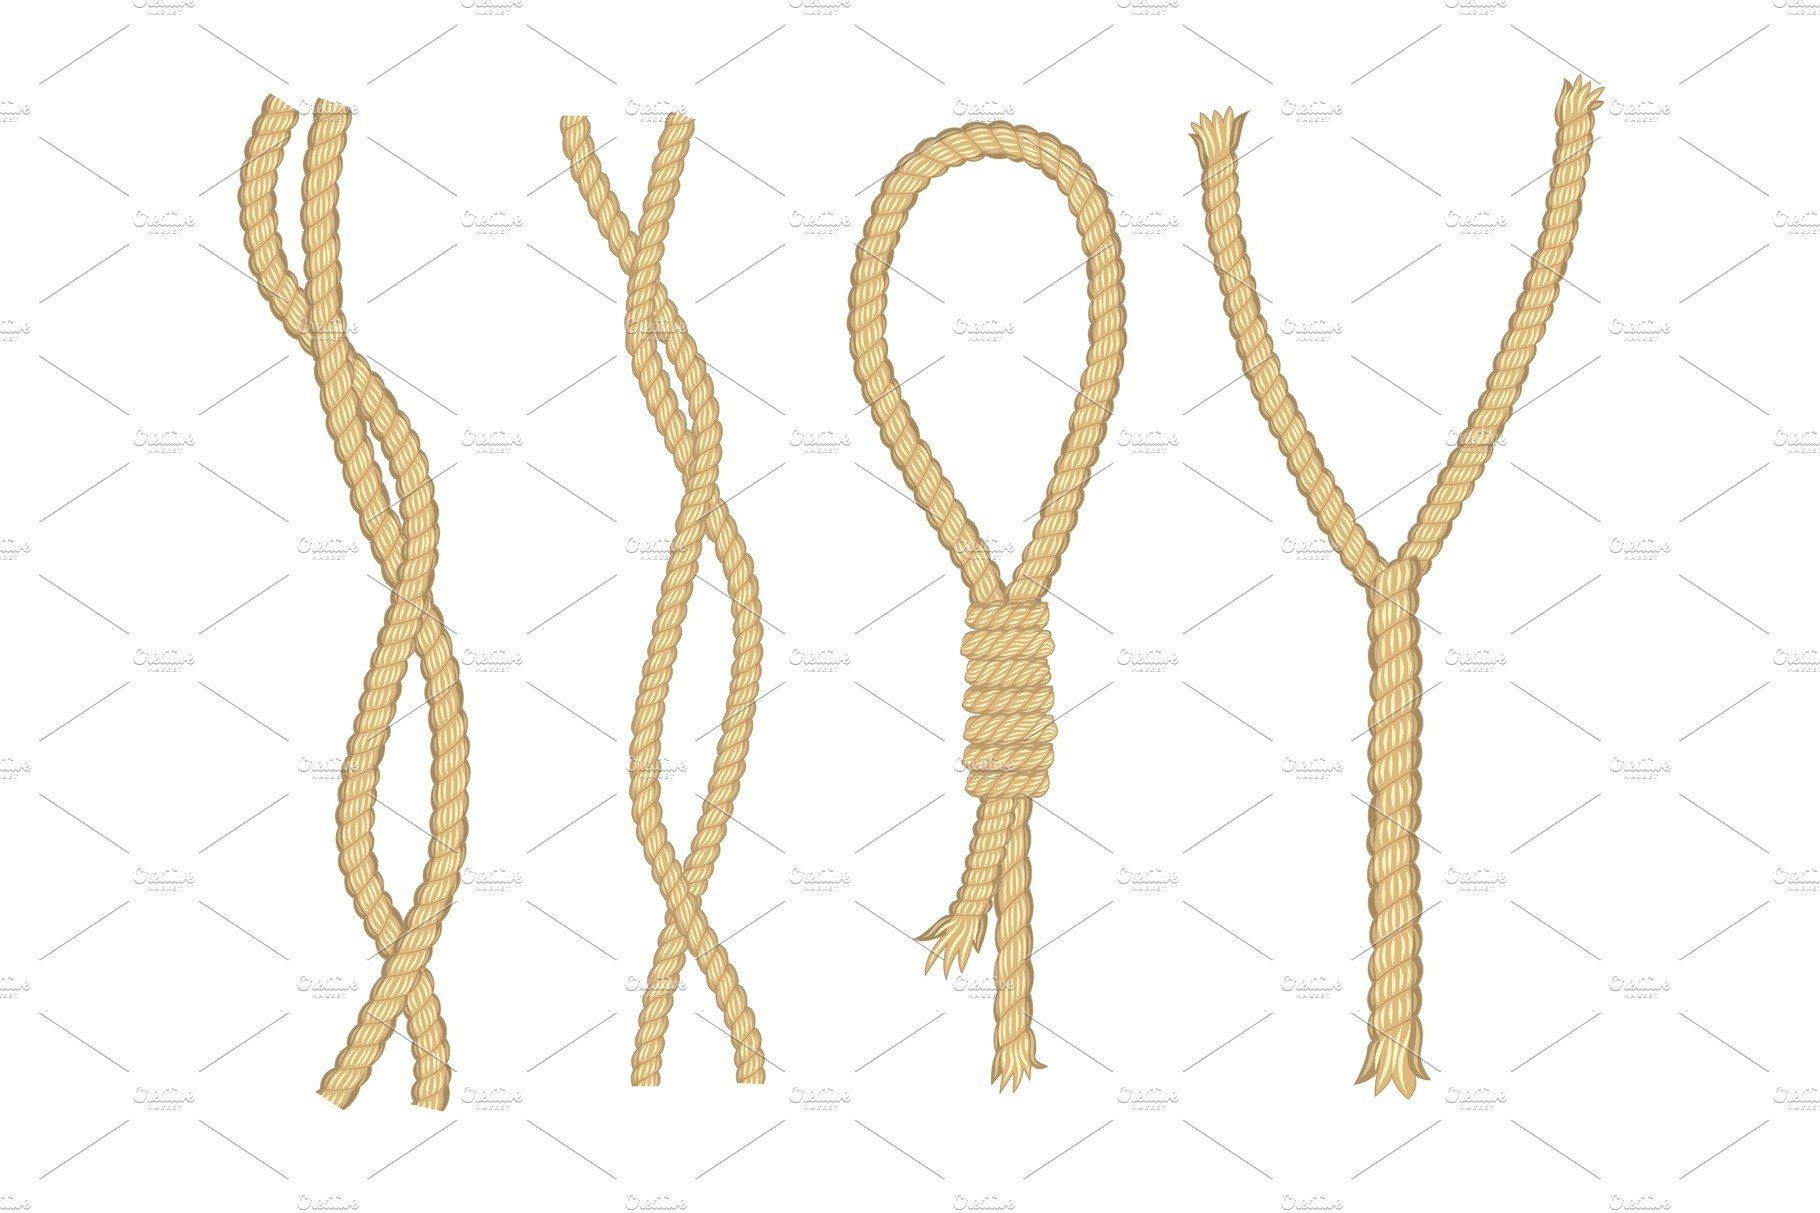 Ropes. Curved nautical ropes cover image.